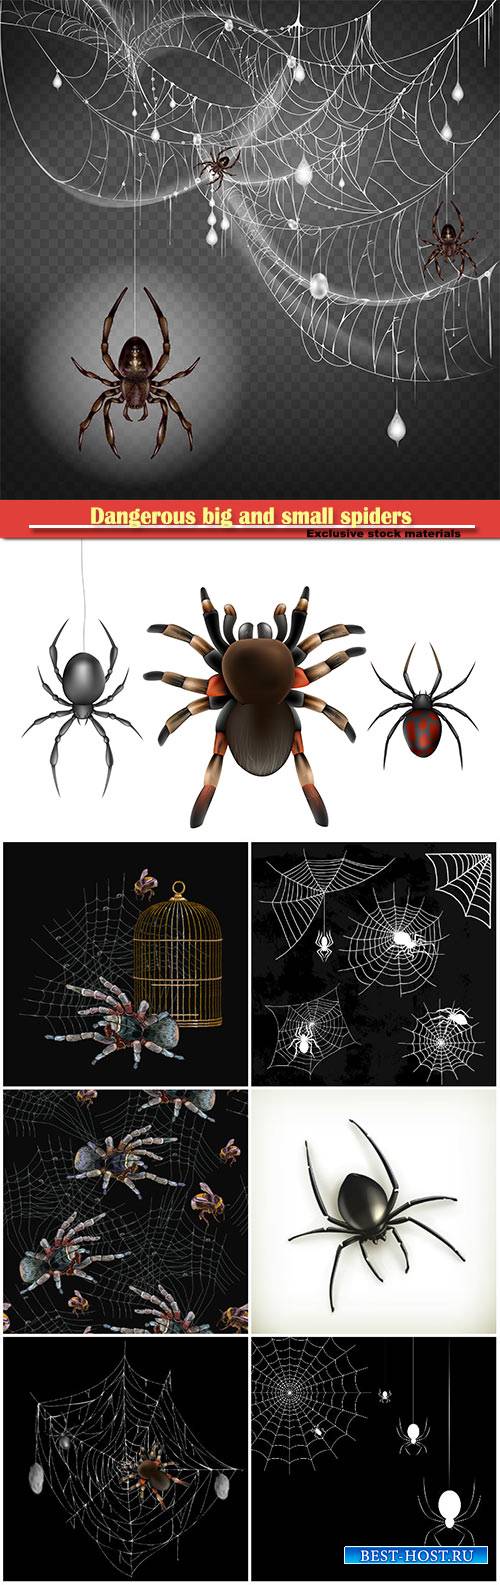 Dangerous, poisonous big and small spiders hanging on thin web string in 3d realistic vector illustration